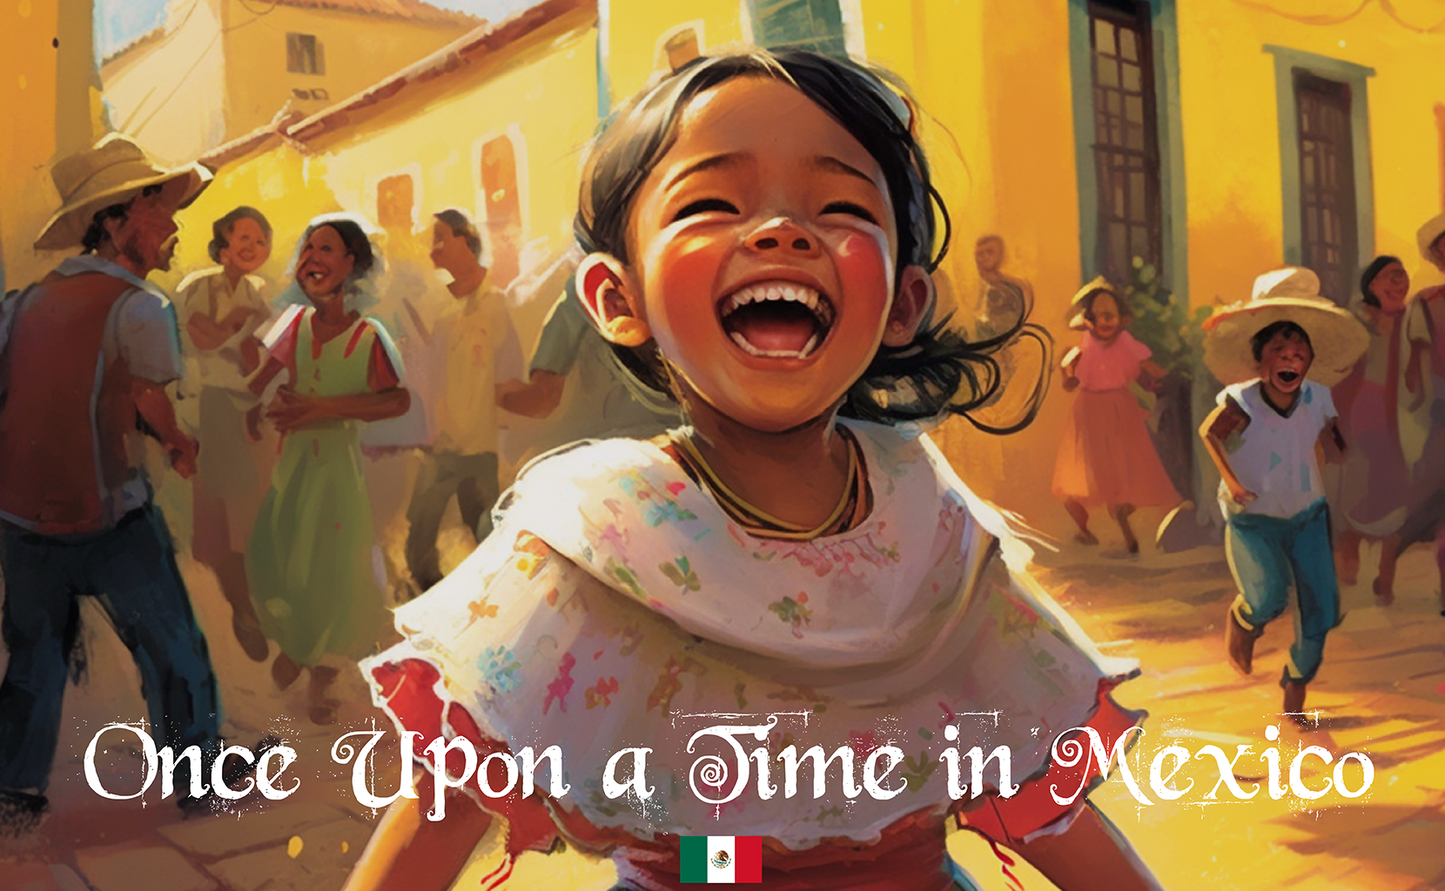 Fairy tale, tales, fantasy, children book, kids stories, fairy tale from Mexico, illustration